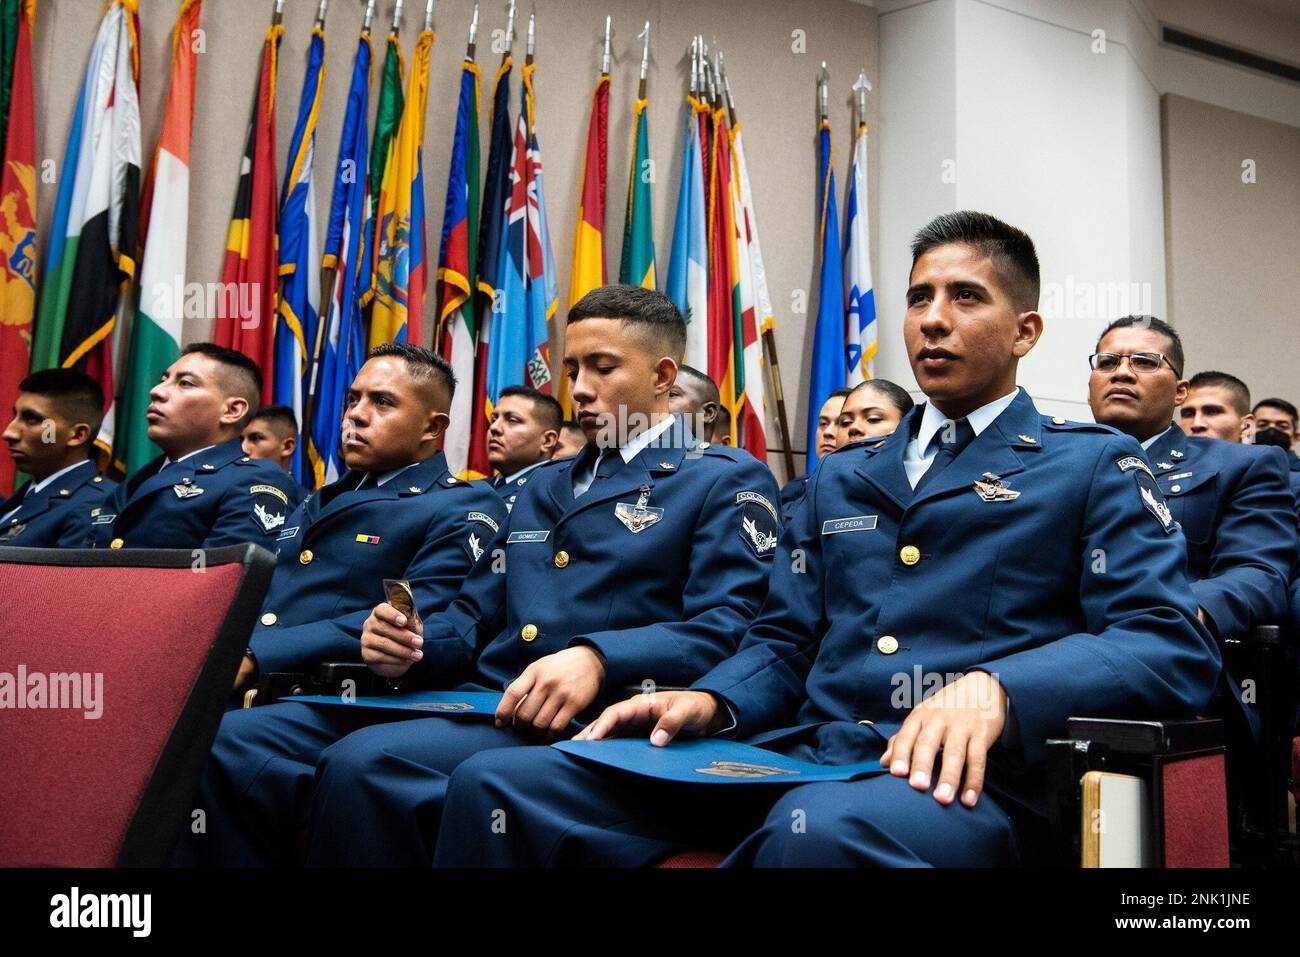 An international military student glances at the coin he received during graduation ceremony for the Inter-American Air Forces Academy, Aug 8, 2022 at Joint Base San Antonio - Lackland. Approximately 200 students from 10 partner nations and the U.S. graduated from IAAFA during B-Cycle graduation. Stock Photo